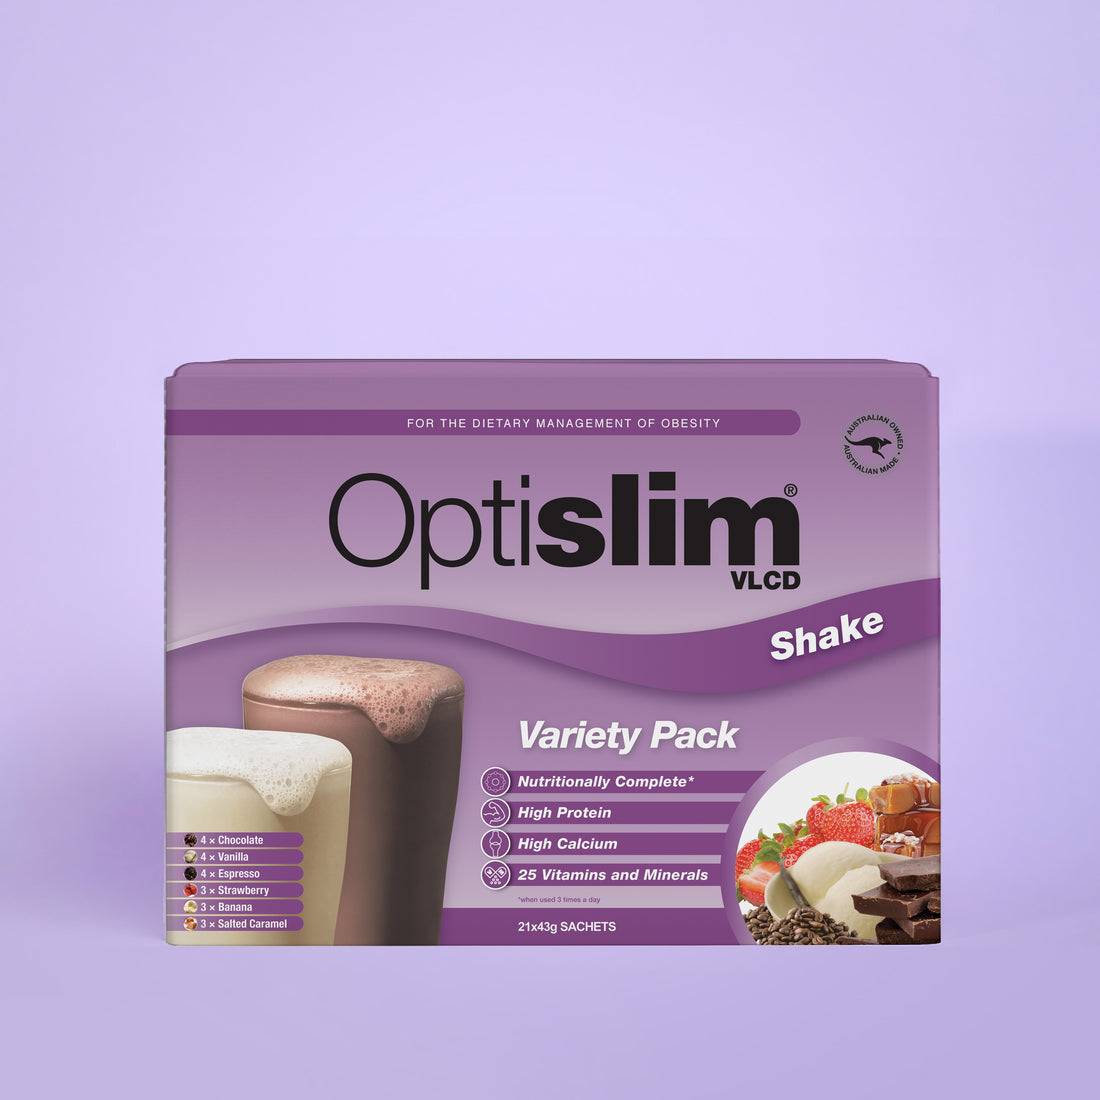 VLCD Shake Variety Pack - 21 Meals